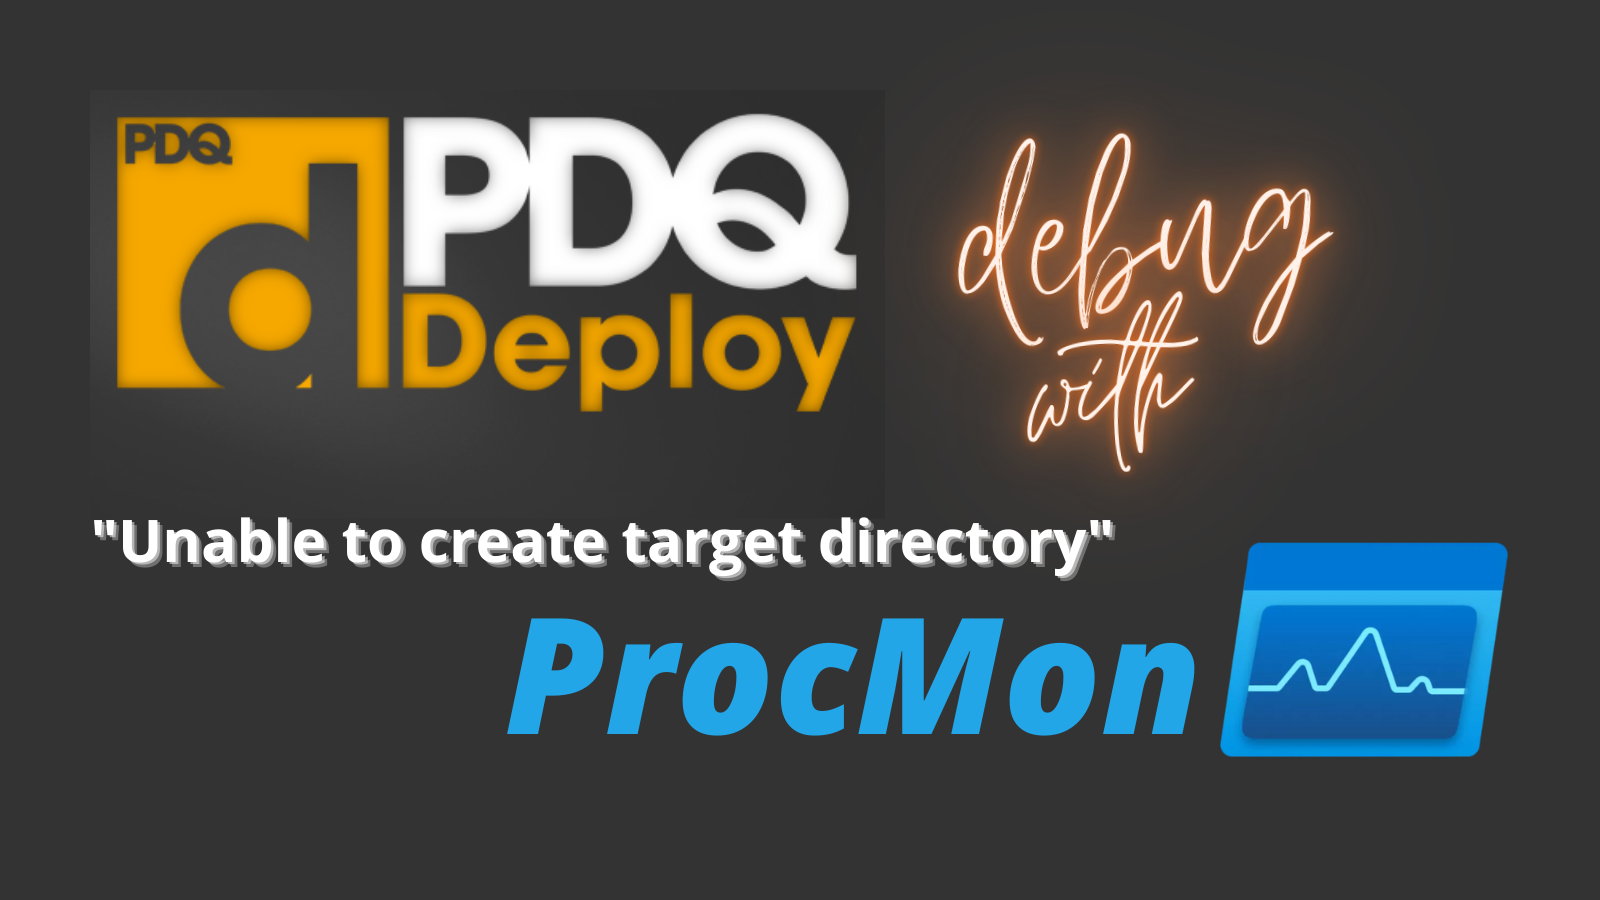 Troubleshooting the "Unable to create target directory" Error in PDQ Deploy with ProcMon